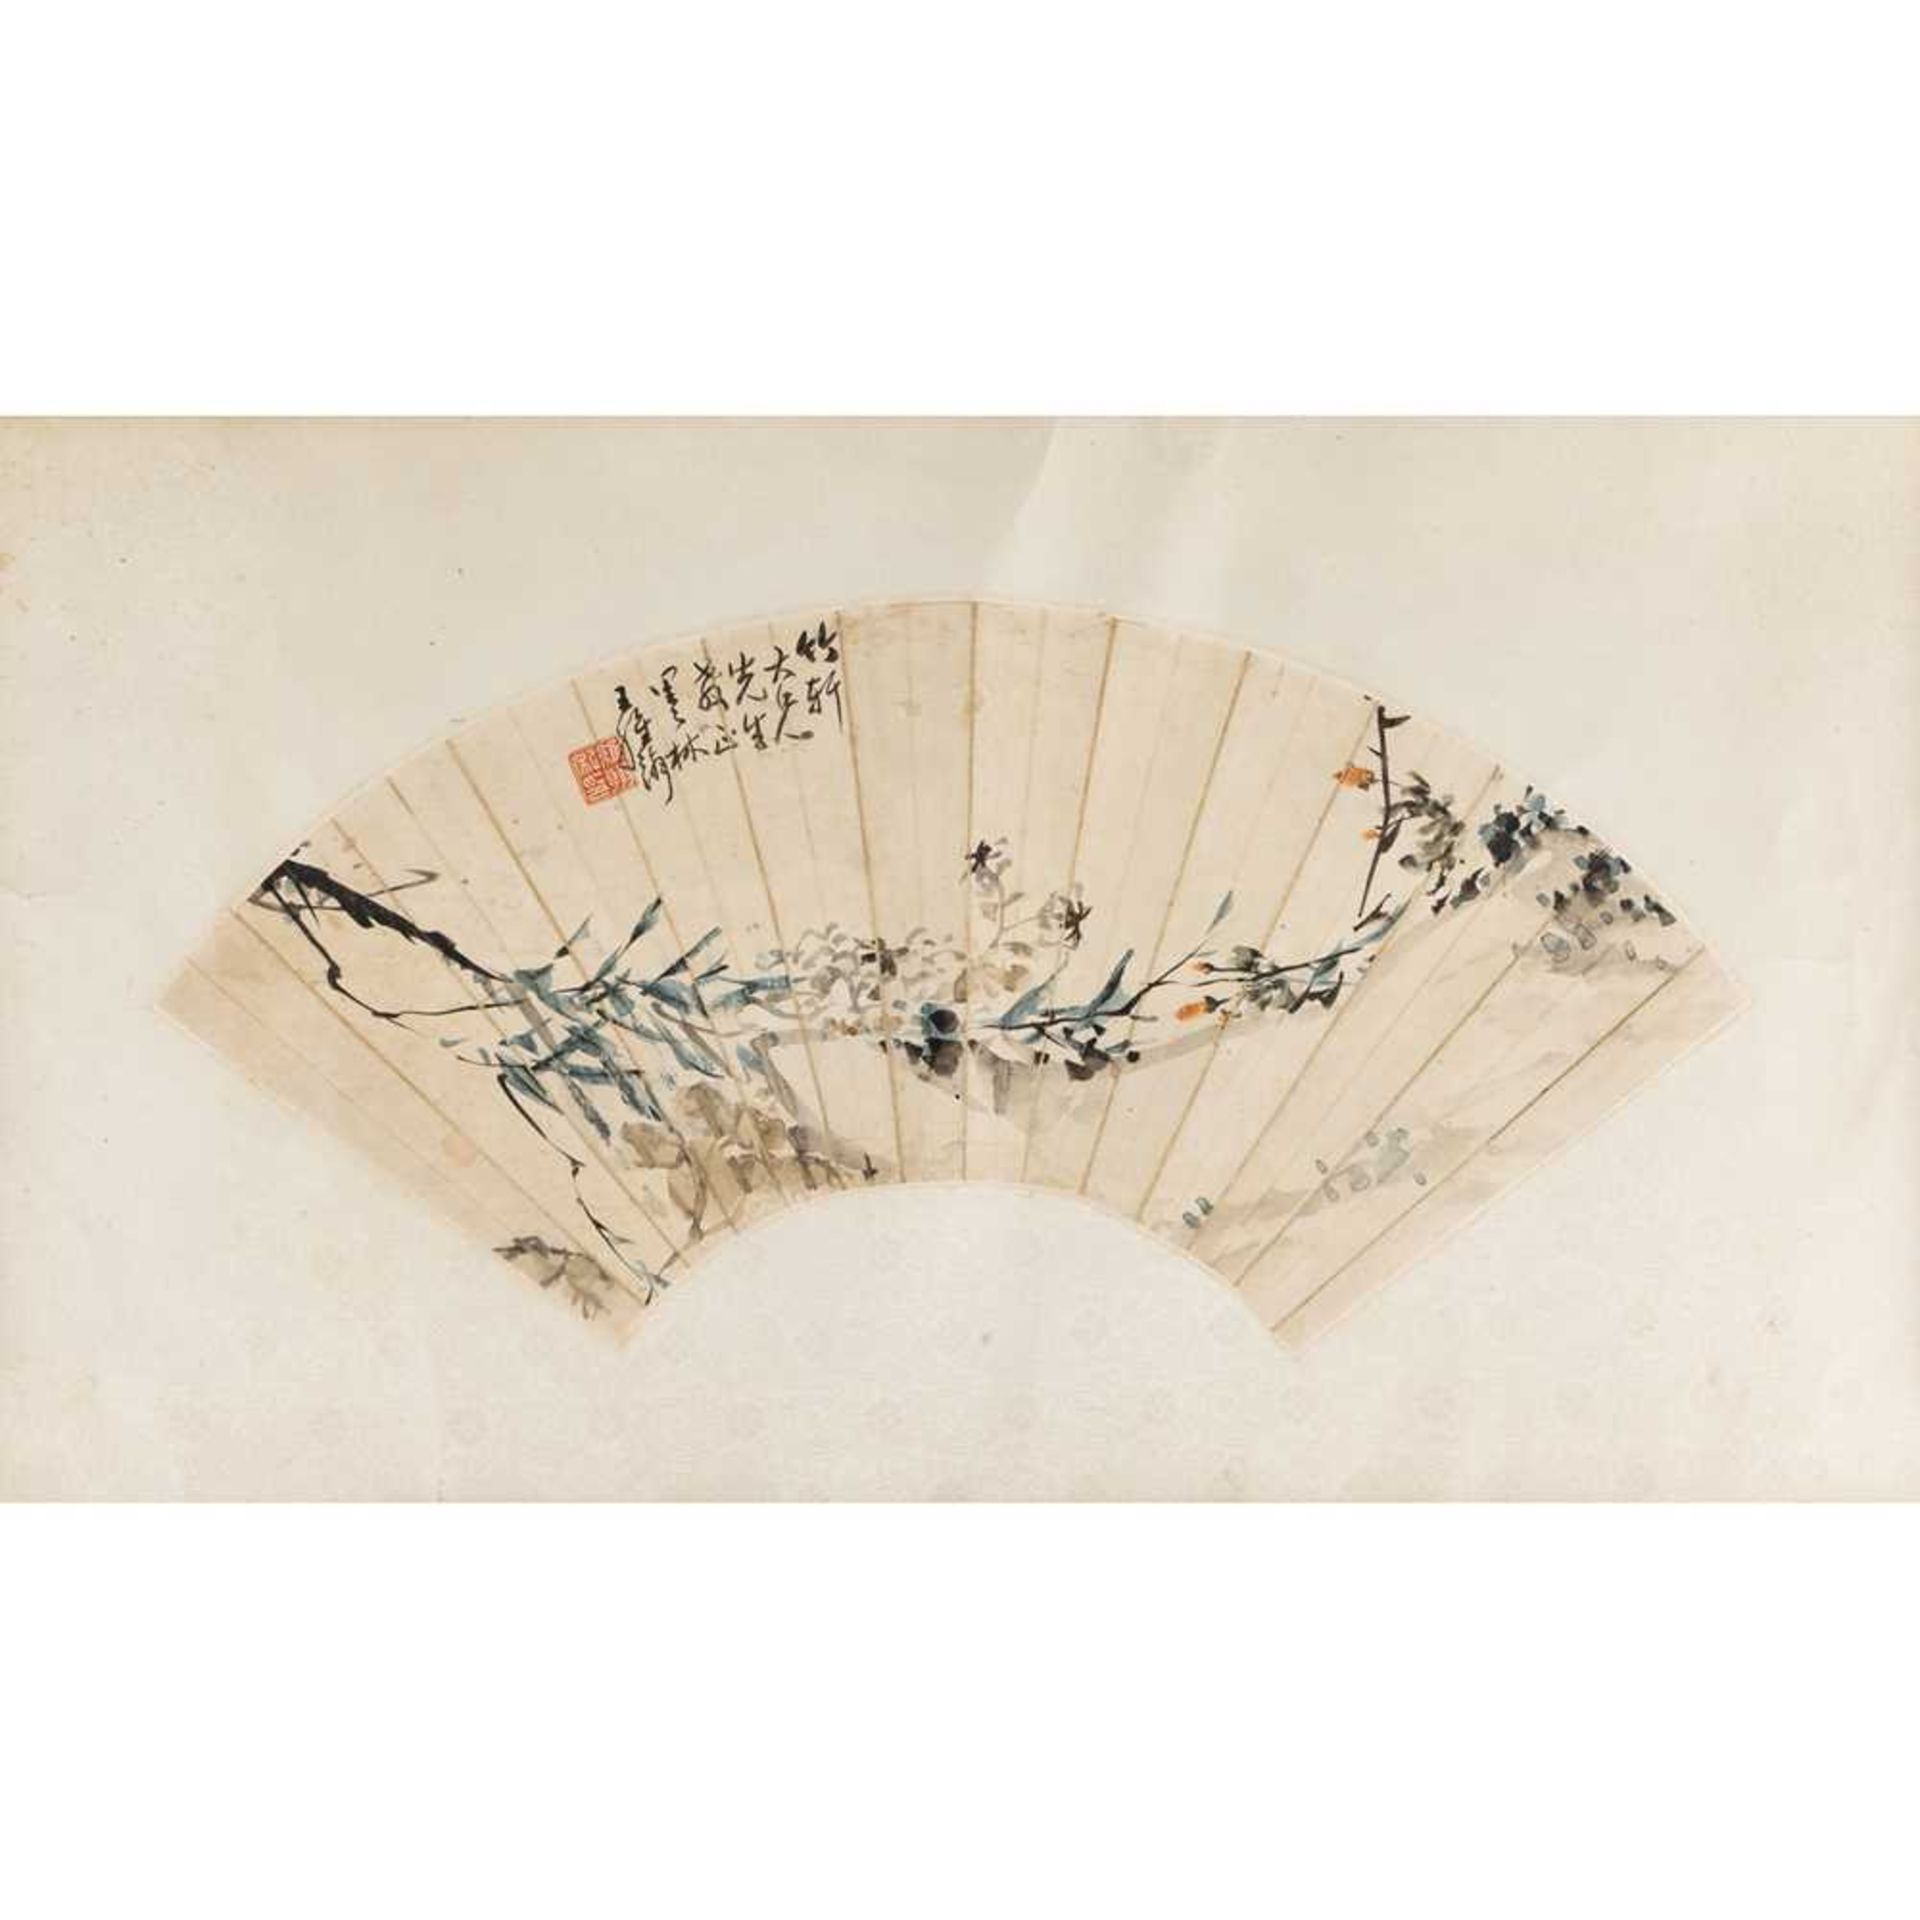 AN INK FAN LEAF CALLIGRAPHY AND A PAINTING ATTRIBUTED TO DENG BANGSHU (1868-1939) AND WANG WEIHAN (C - Image 3 of 3